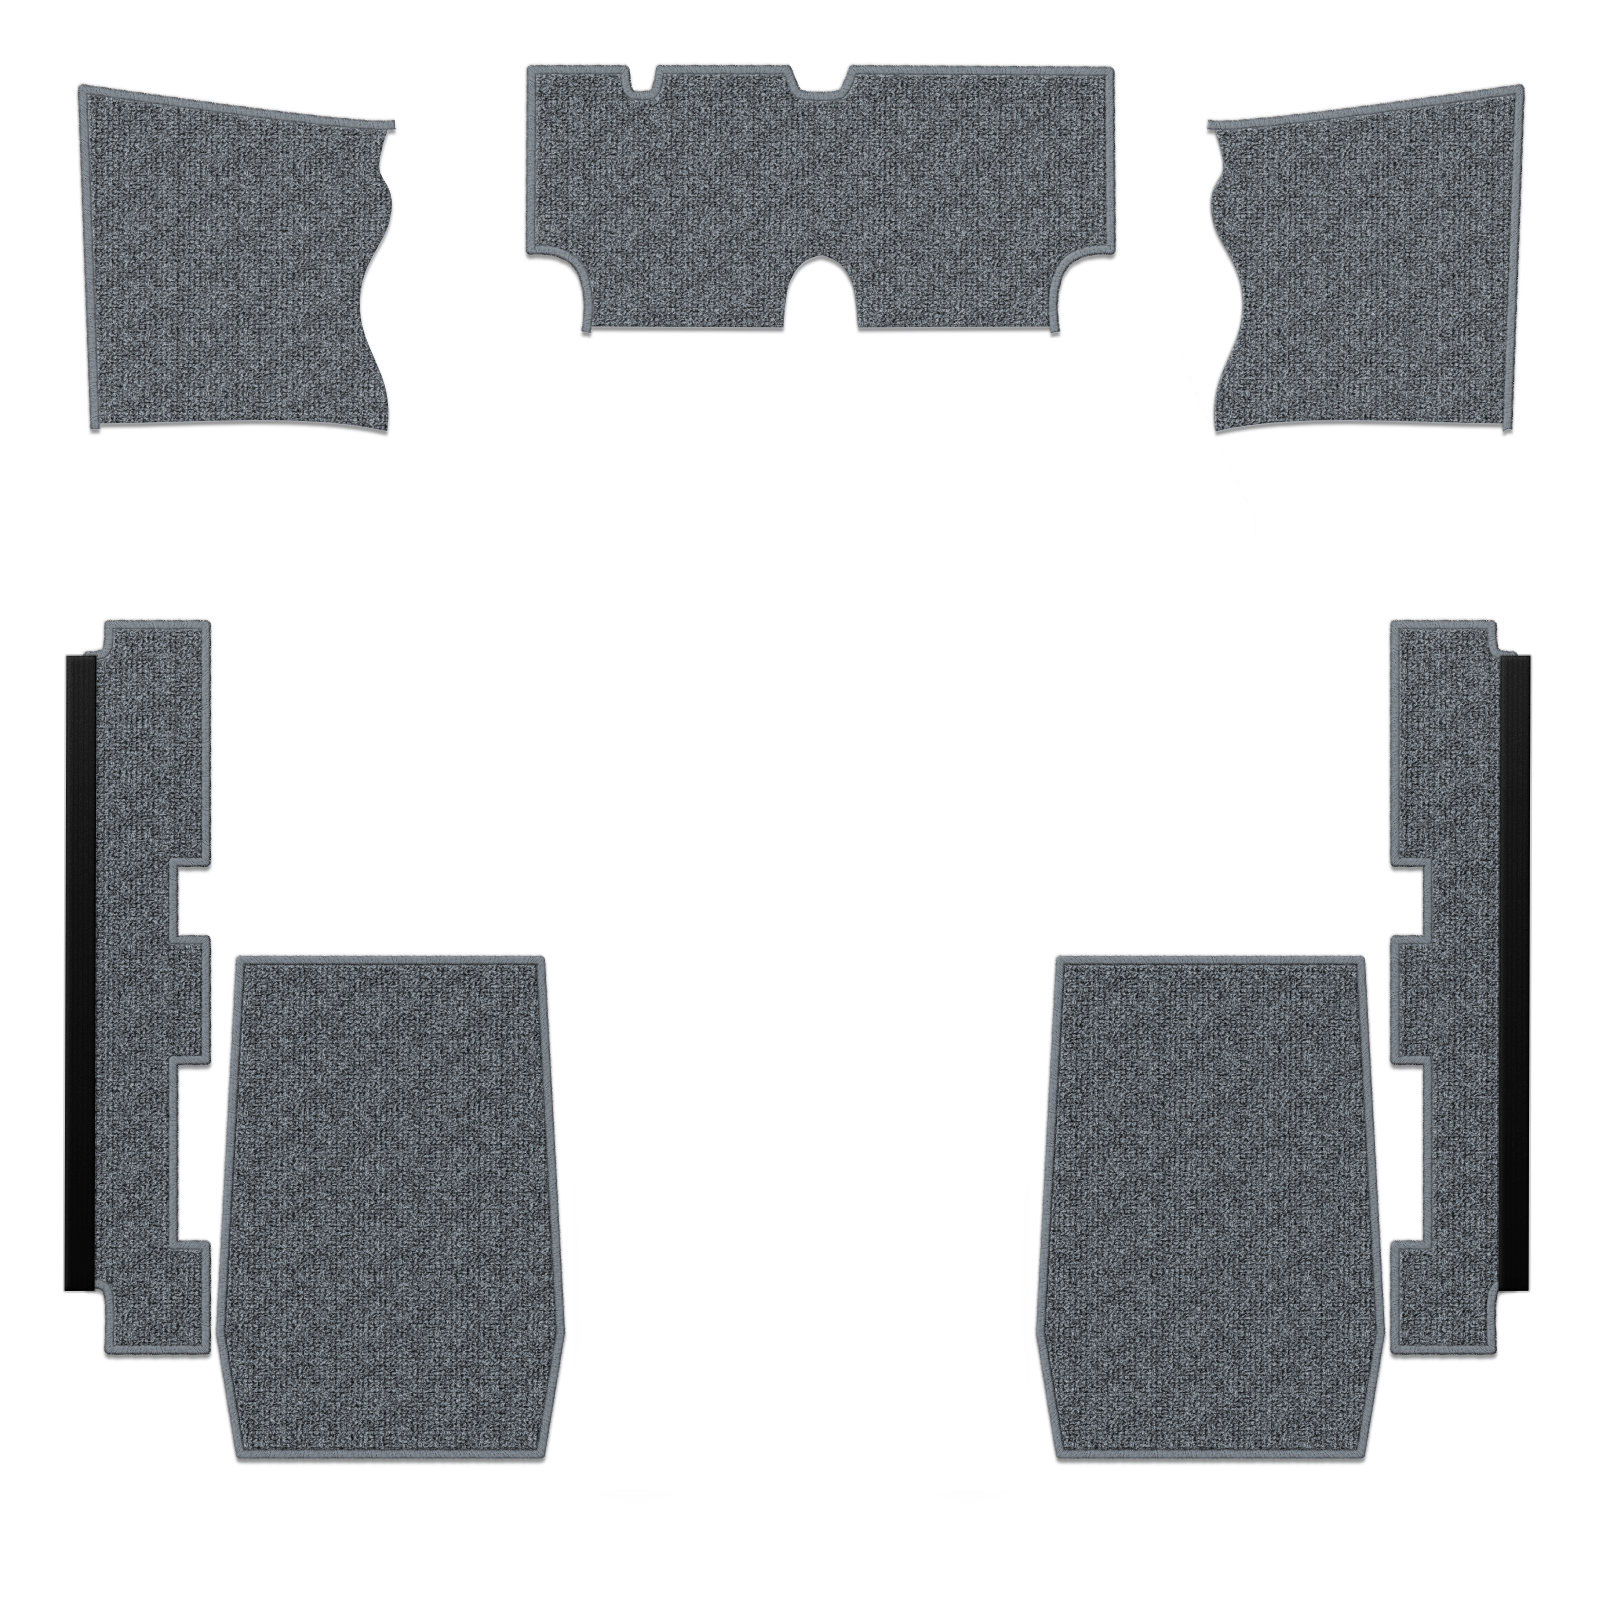 1973-1977 VW Beetle Carpet Kit - Front - 7 Pcs - for use with Rubber Mats - Charcoal Loop